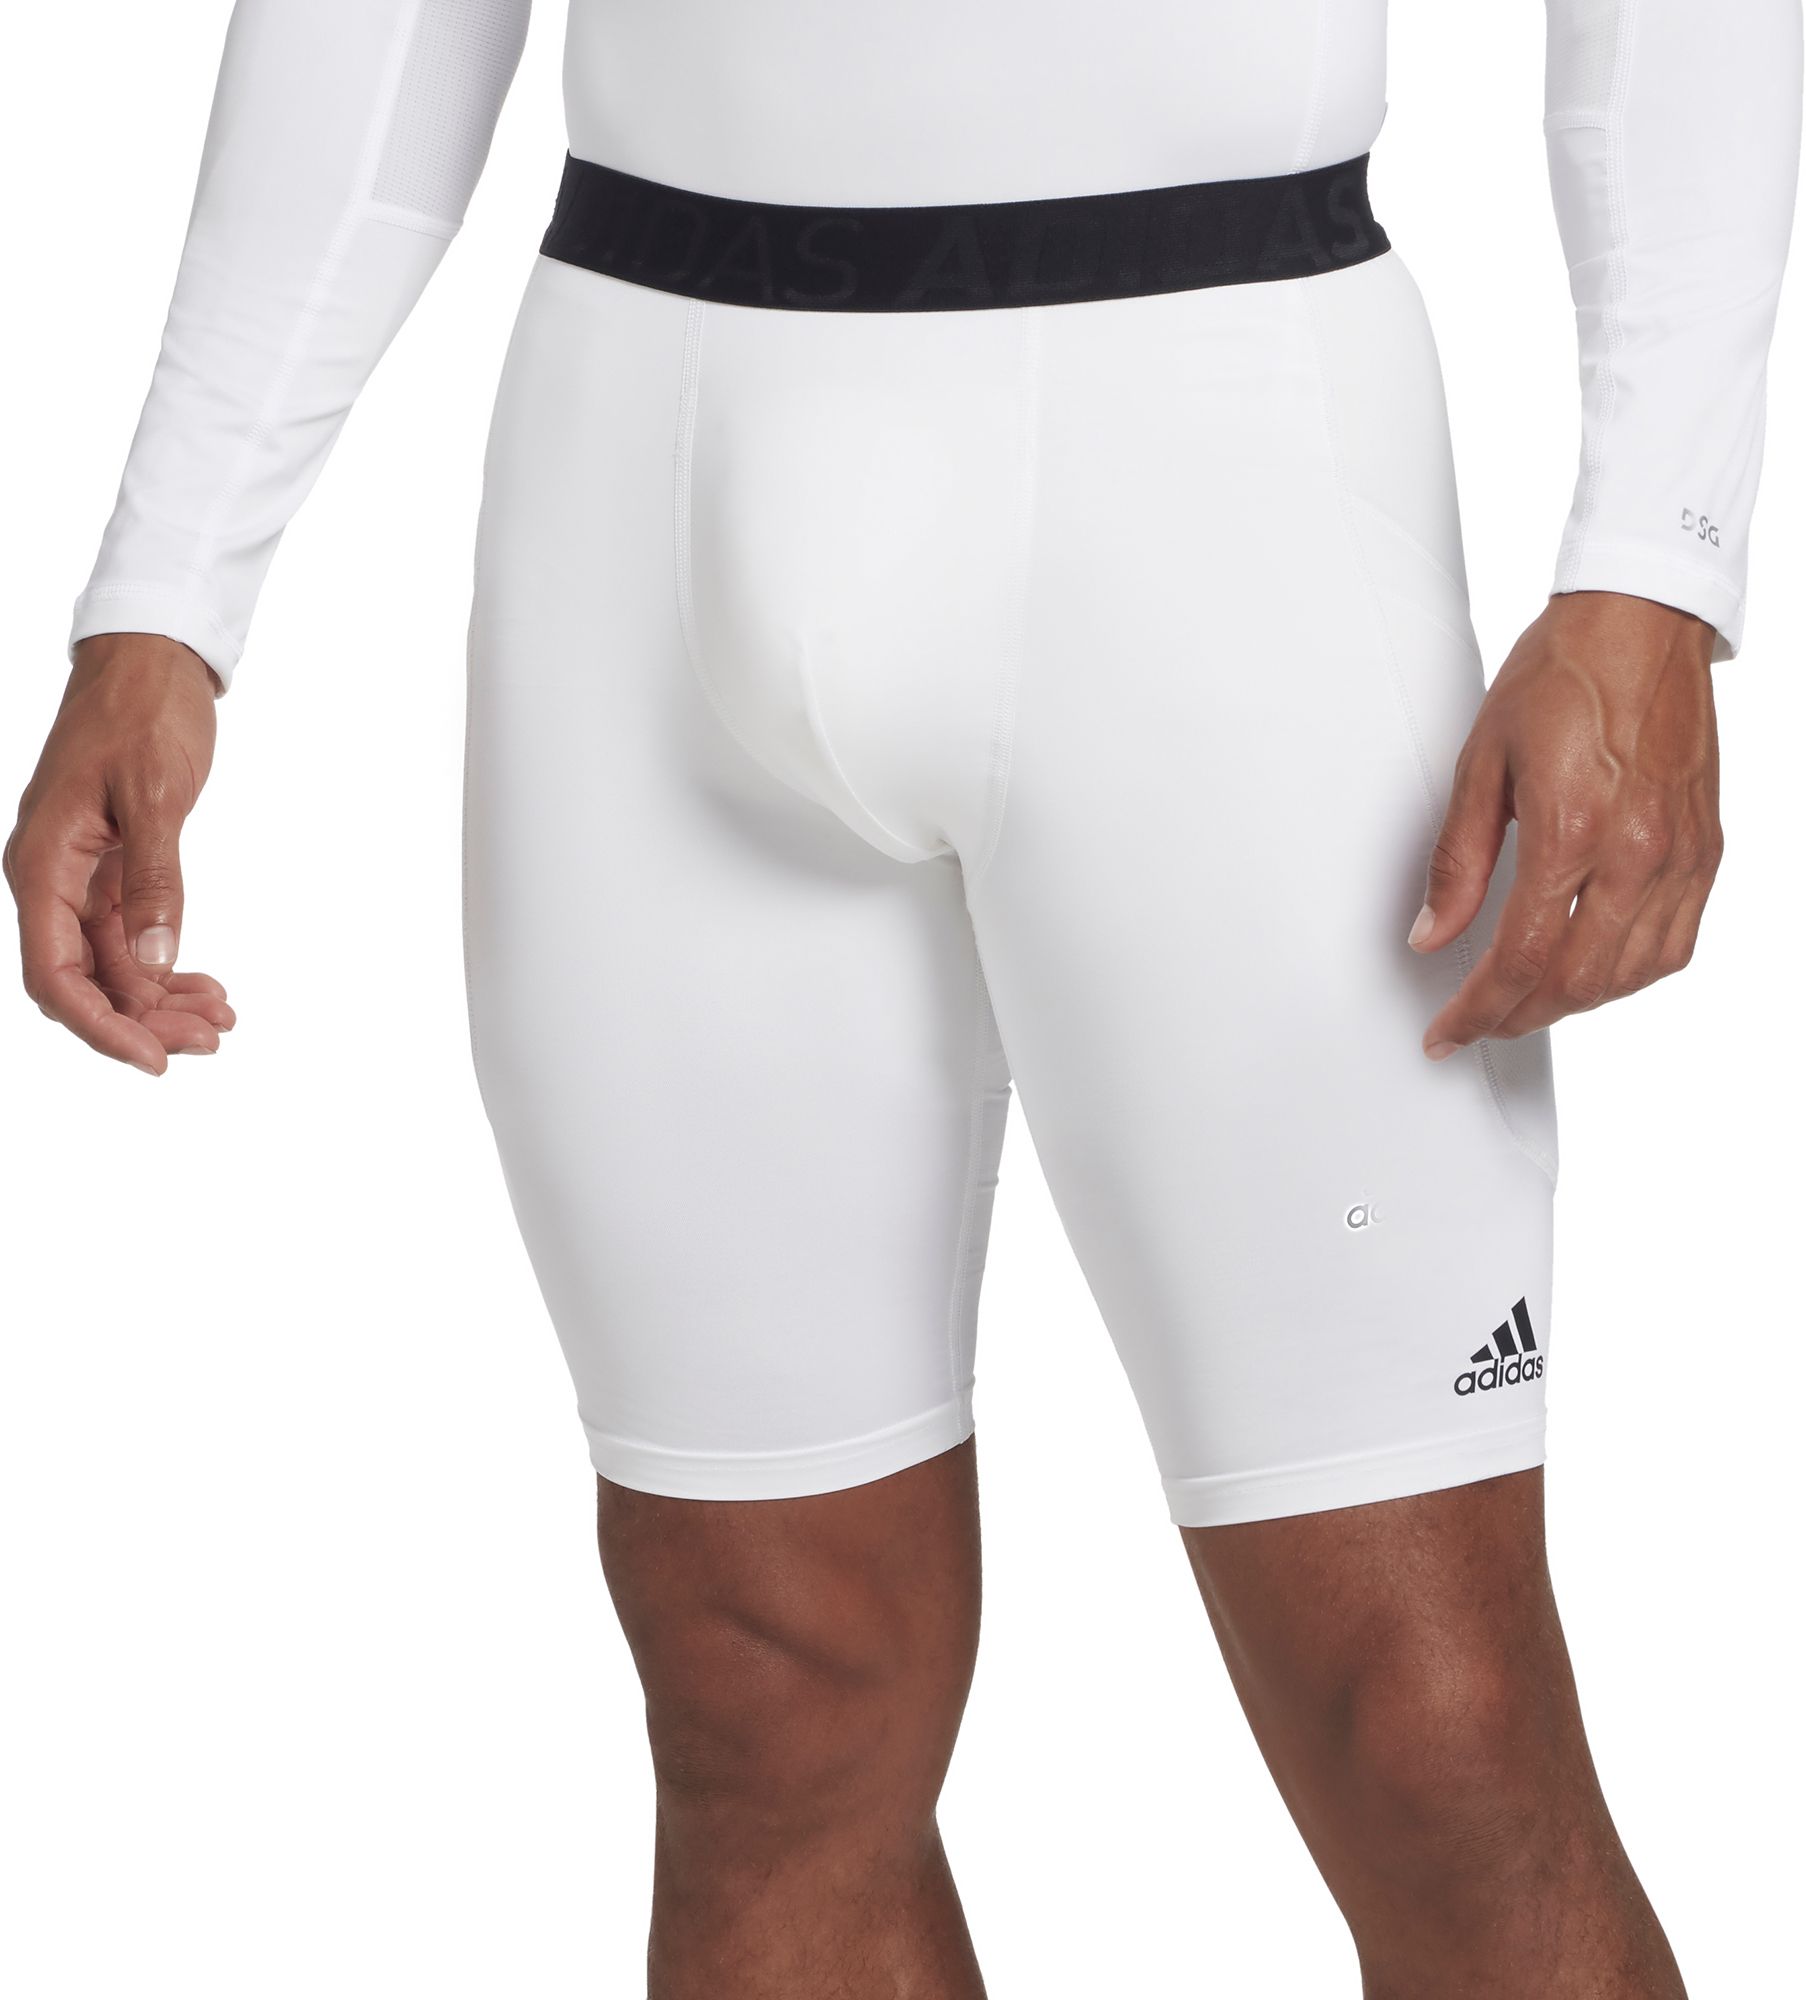 adidas sliding shorts with cup